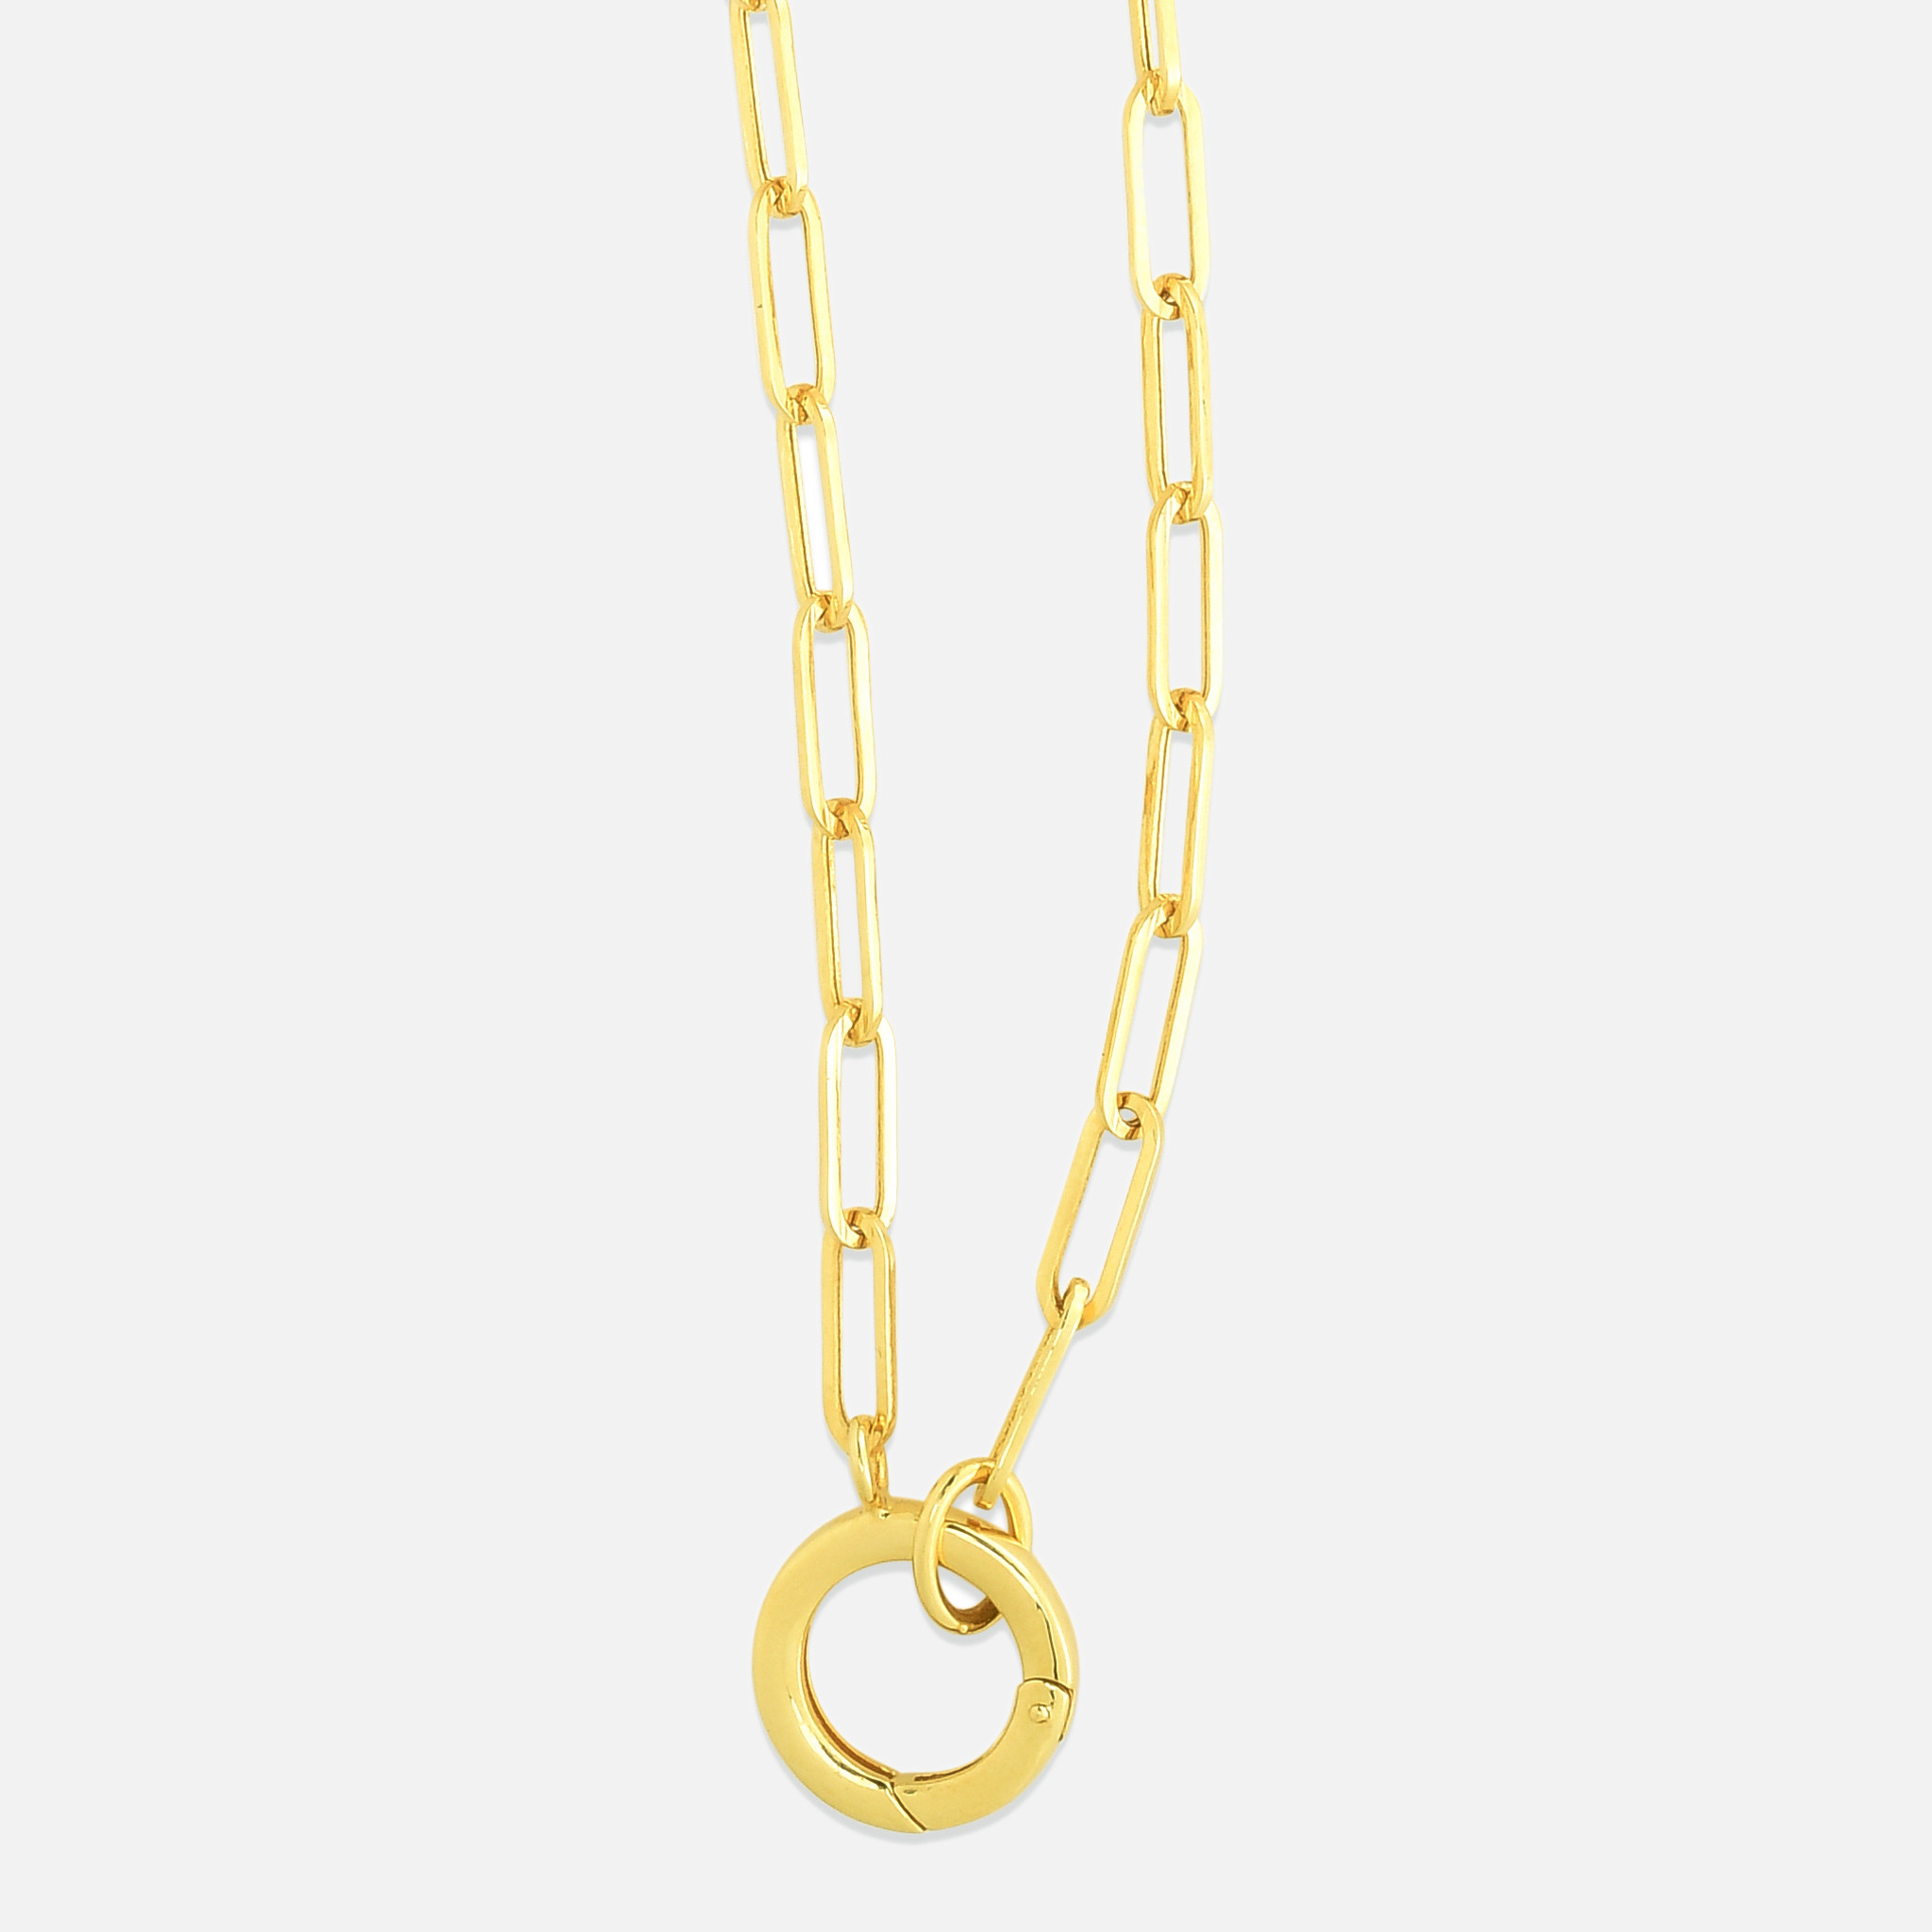 This paperclip charm necklace features a round, front-facing clasp charm that can be worn on its own or used as a link to layer your favorite charms together.